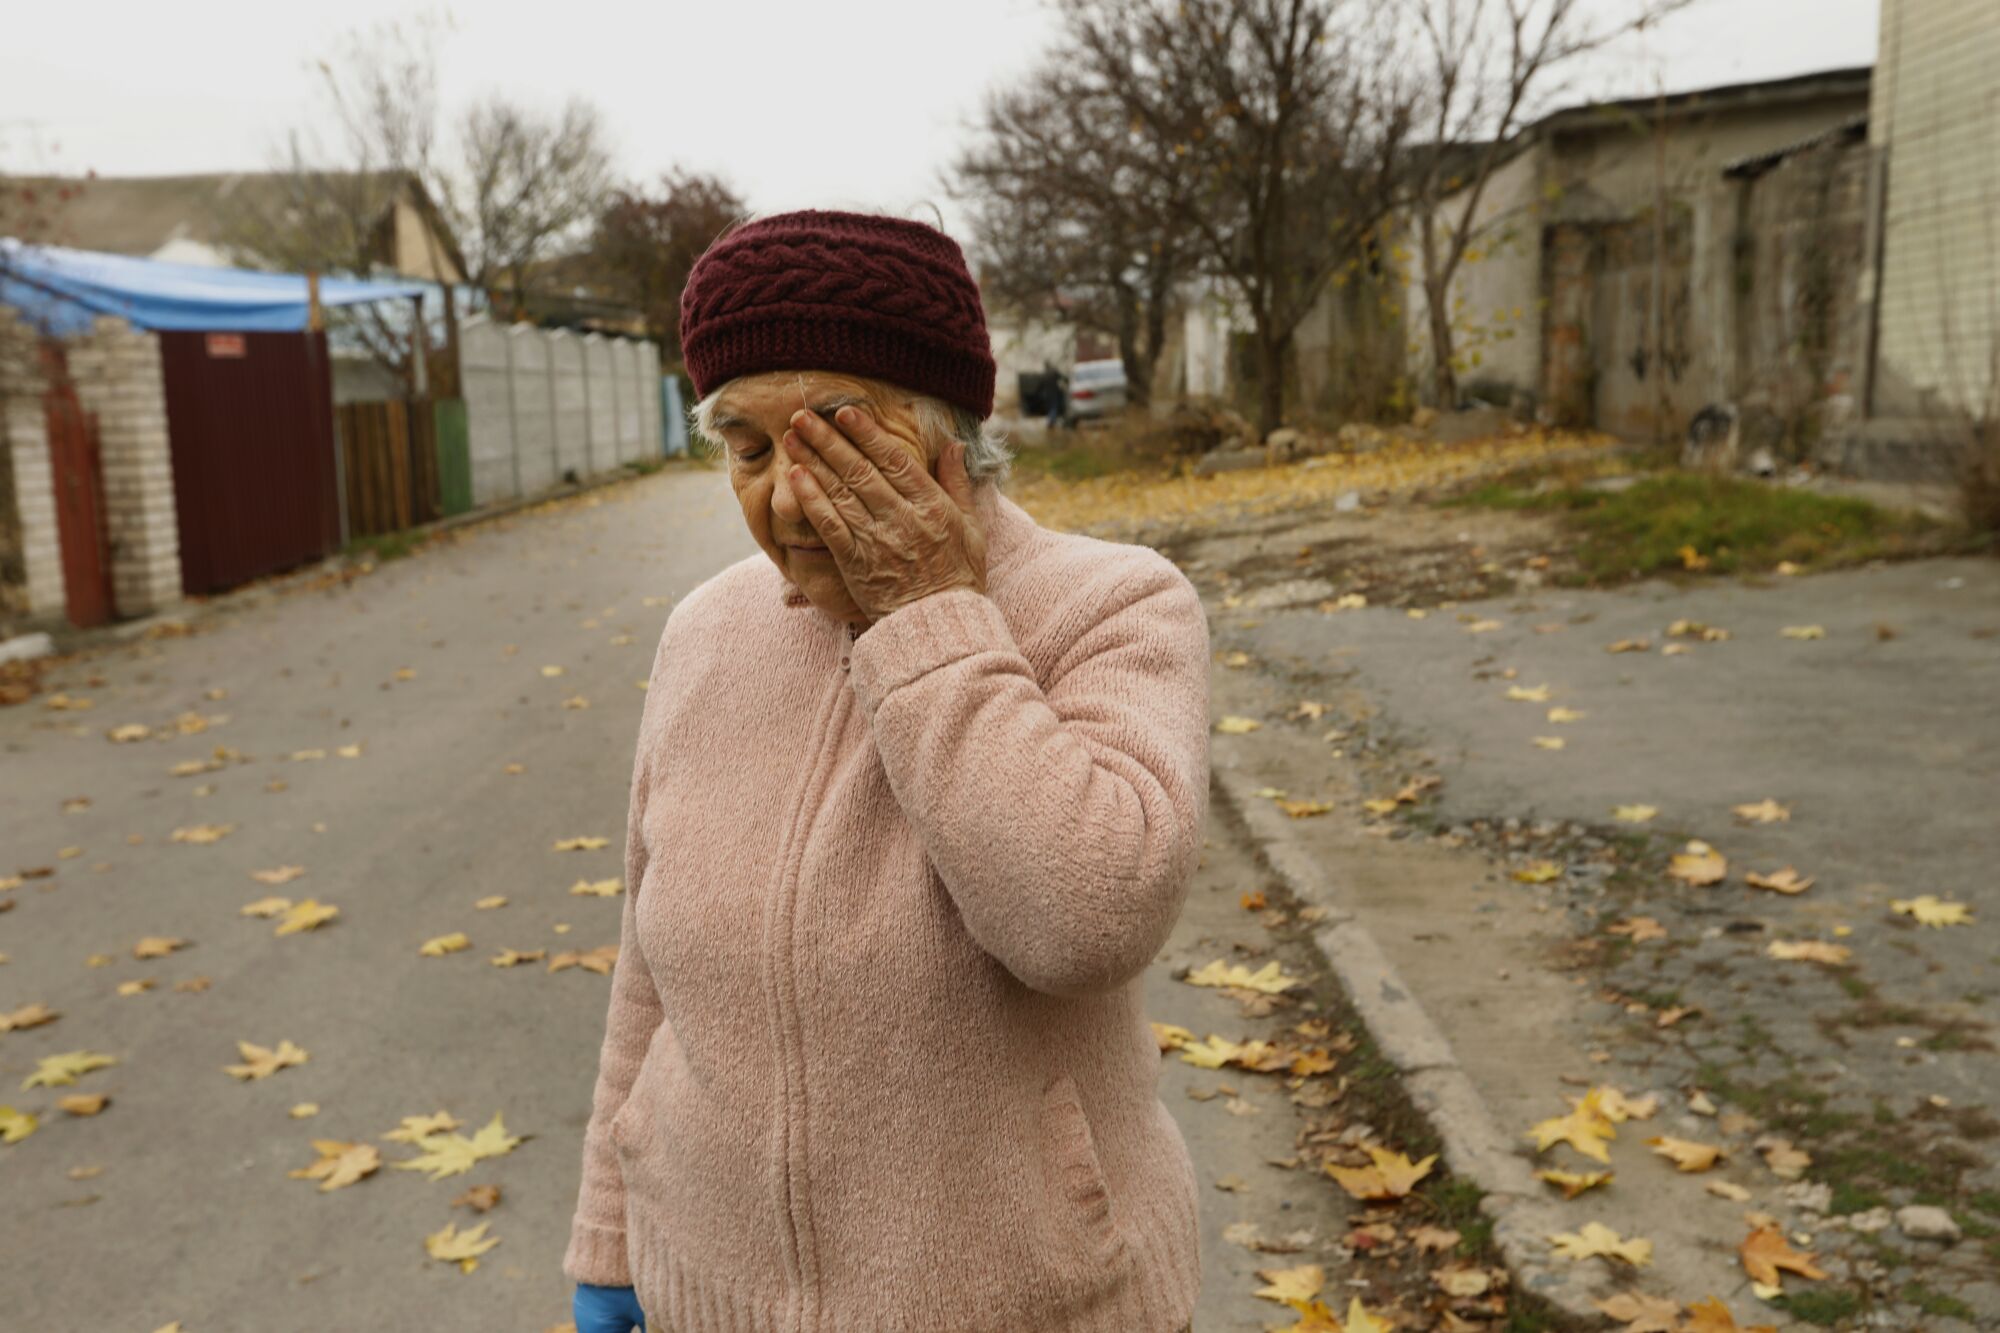 A woman in a pink cardigan and burgundy knit hat holds a hand to her face while standing on a street lined with buildings 